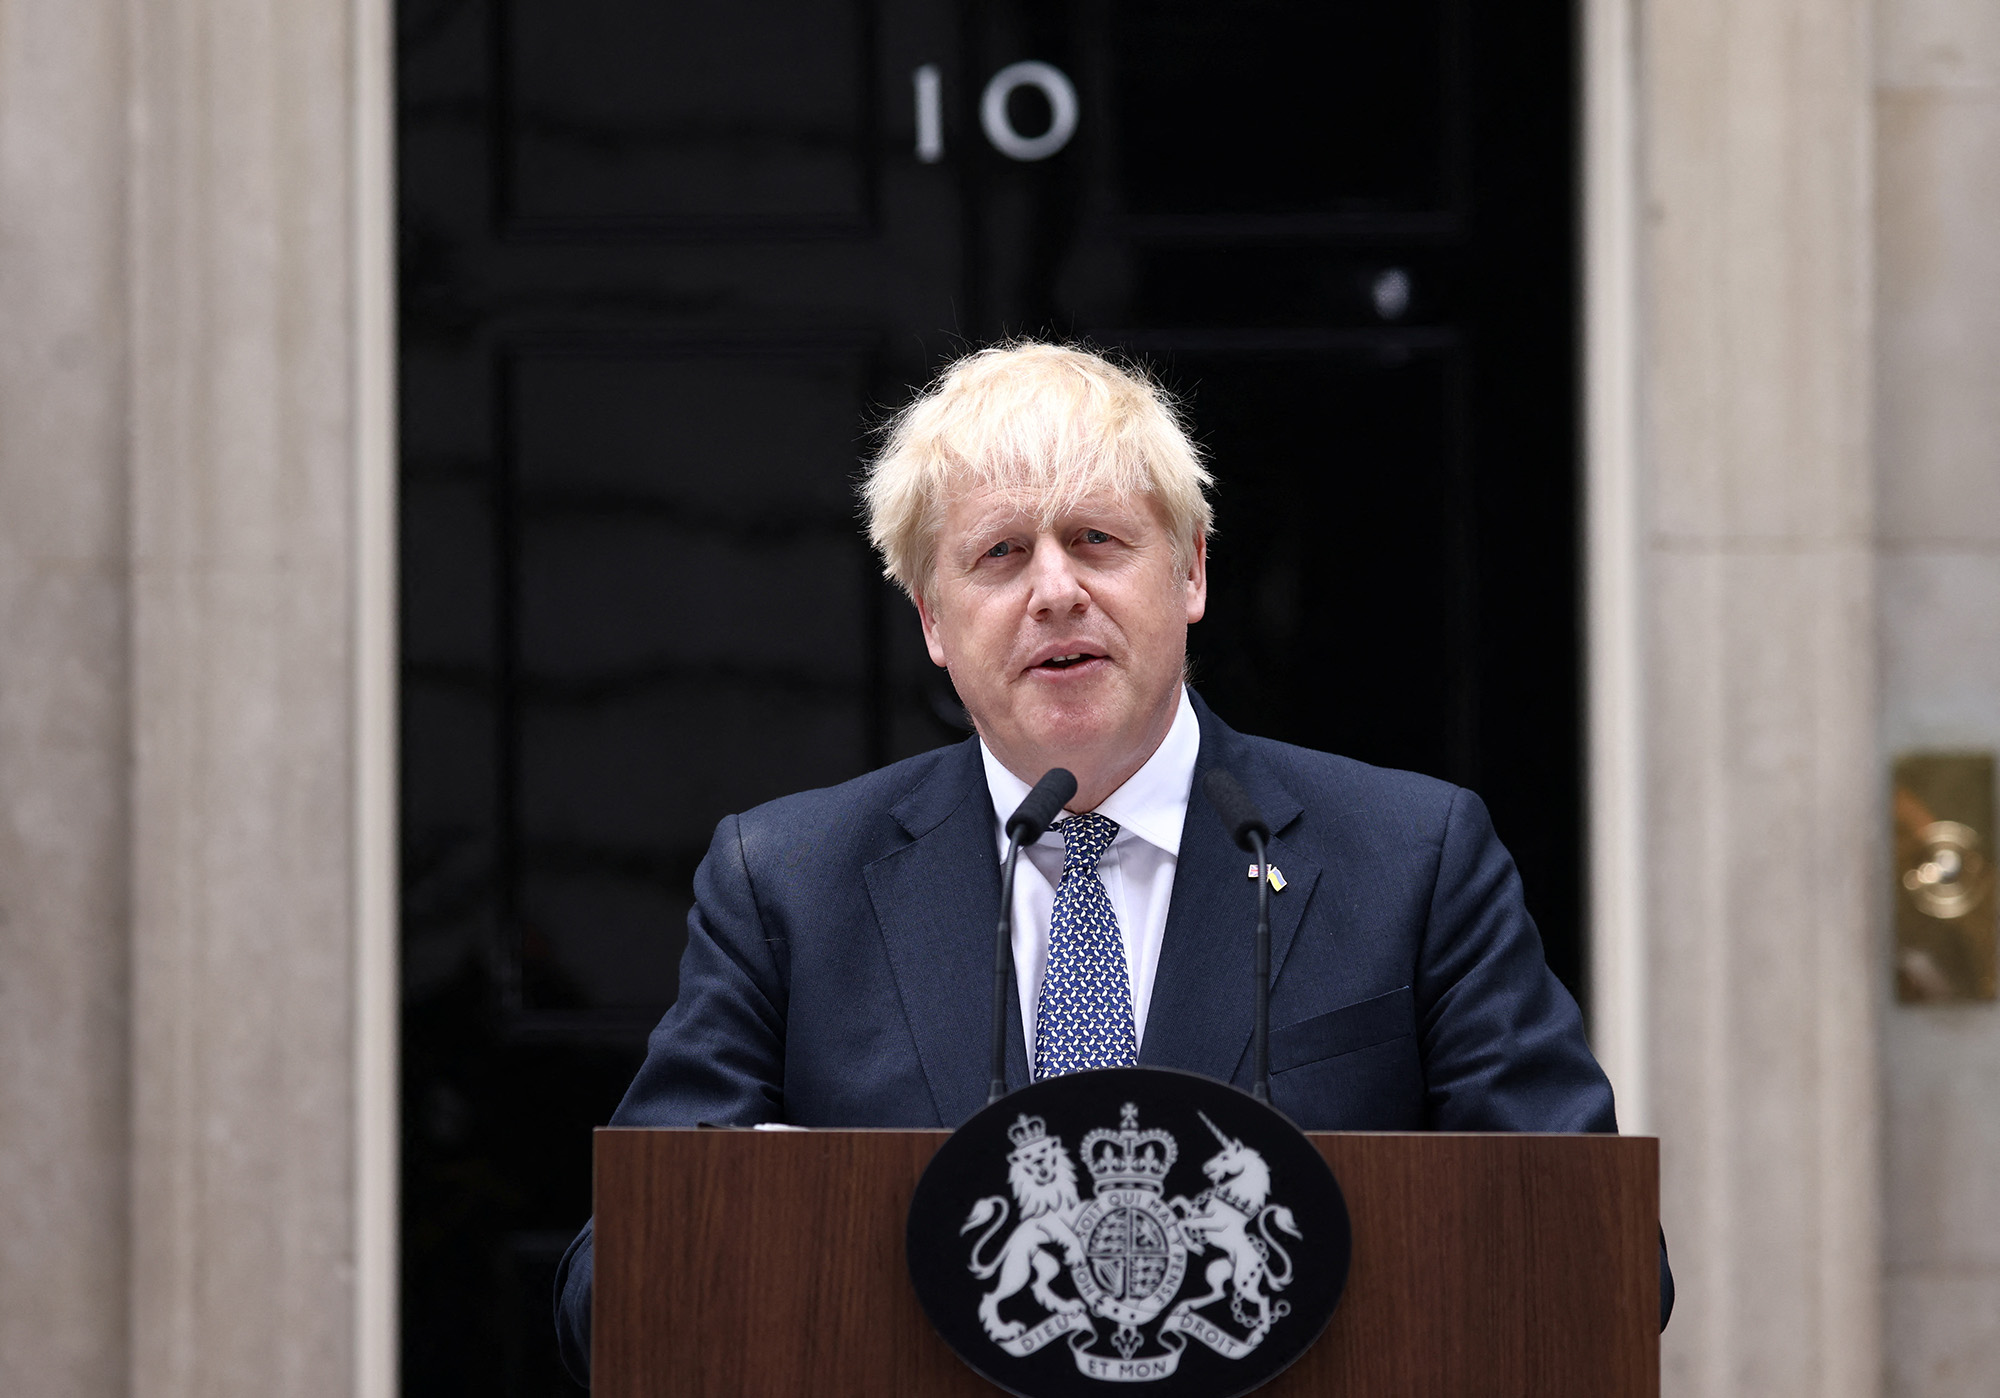 British Prime Minister Boris Johnson makes a statement at Downing Street in London, England, on July 7.